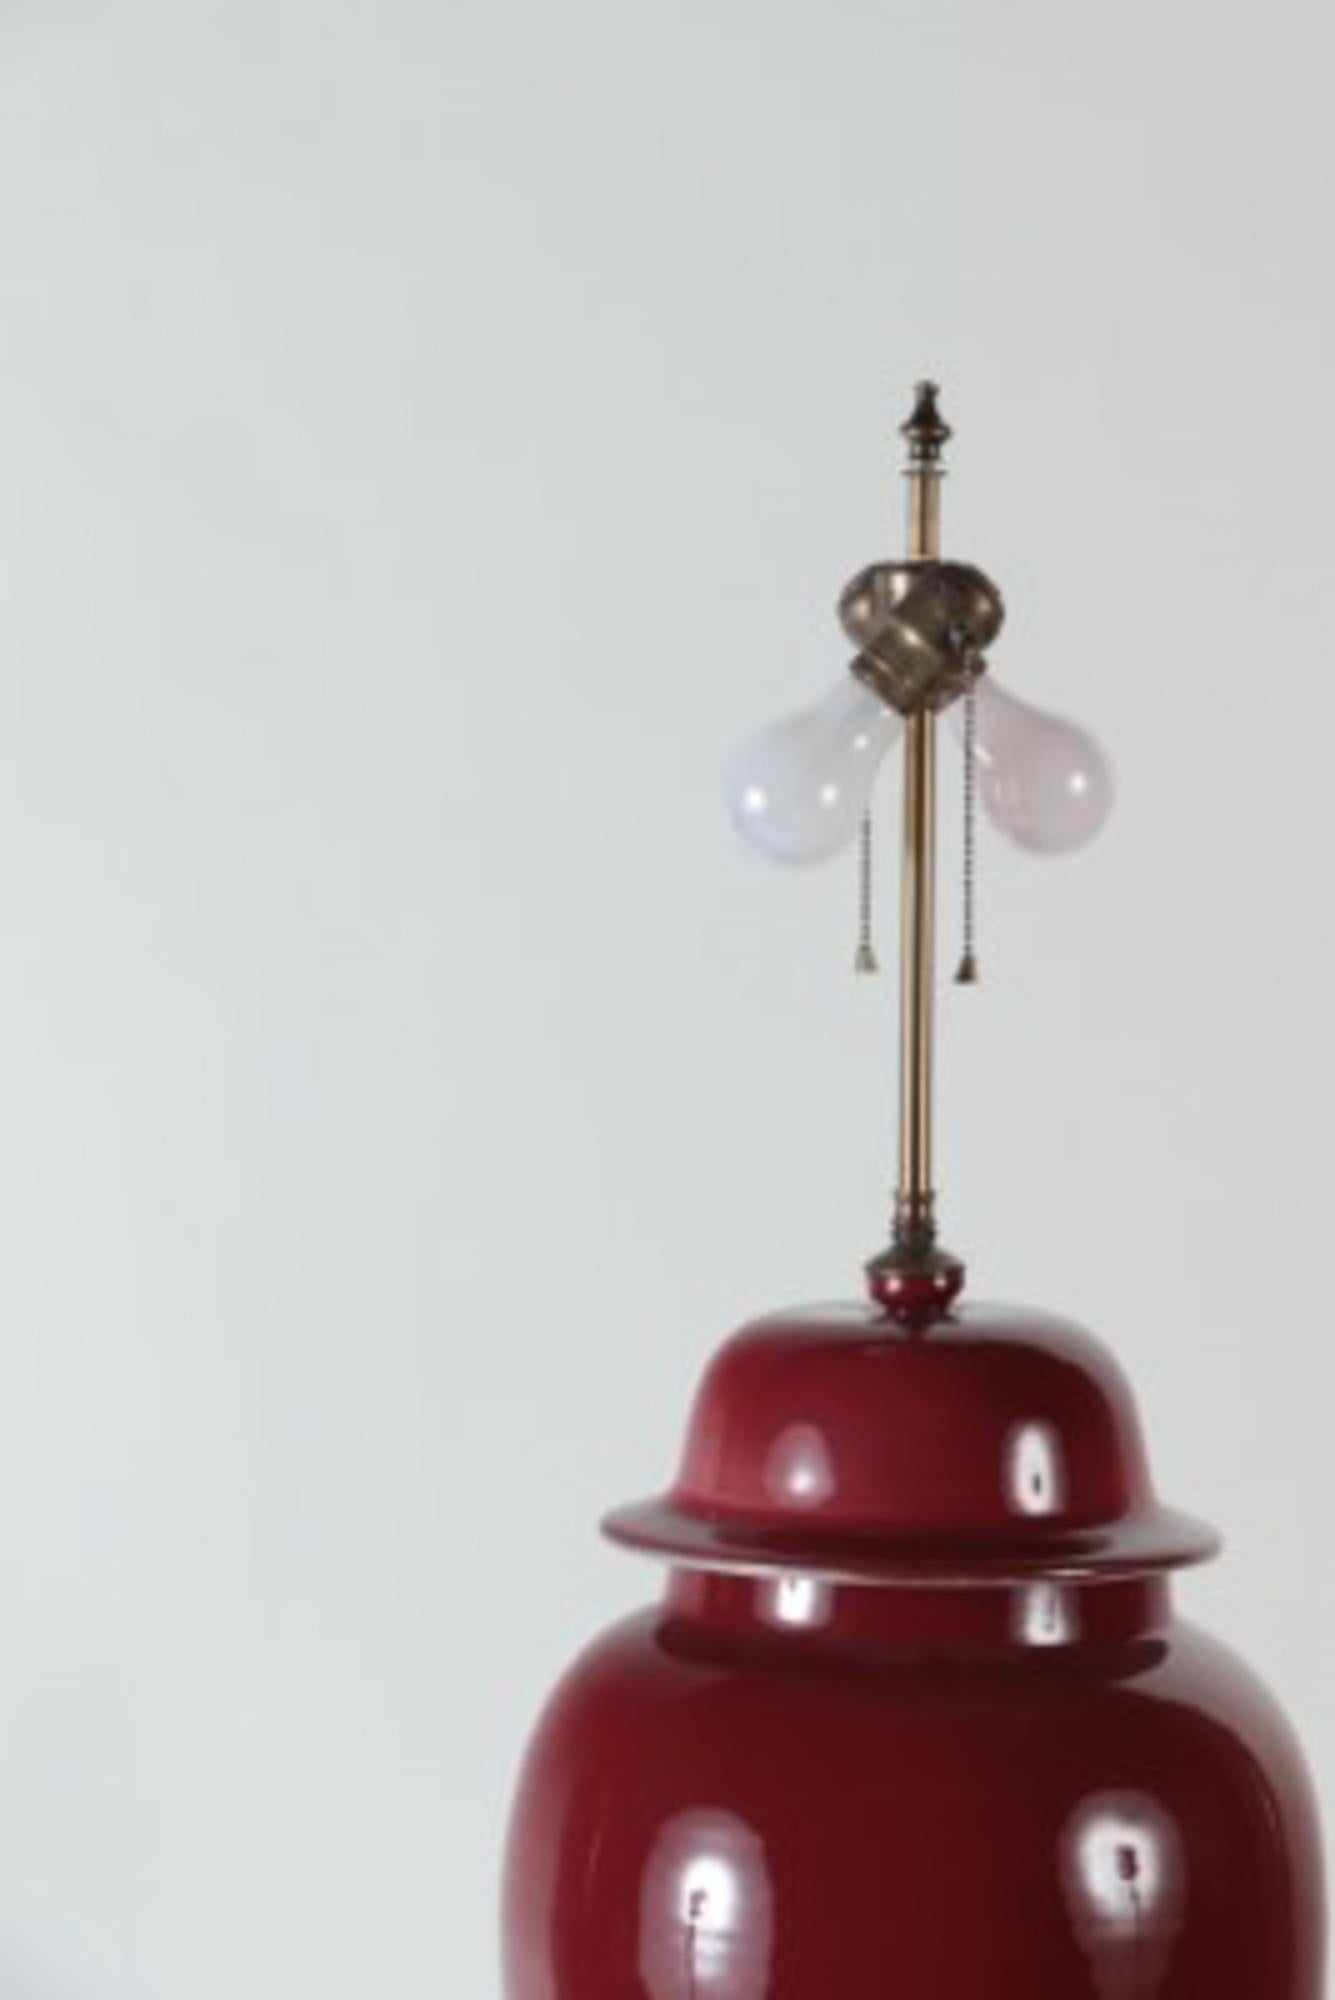 Modern Oxblood Vase Table Lamp on Wooden Base, circa 1970s For Sale